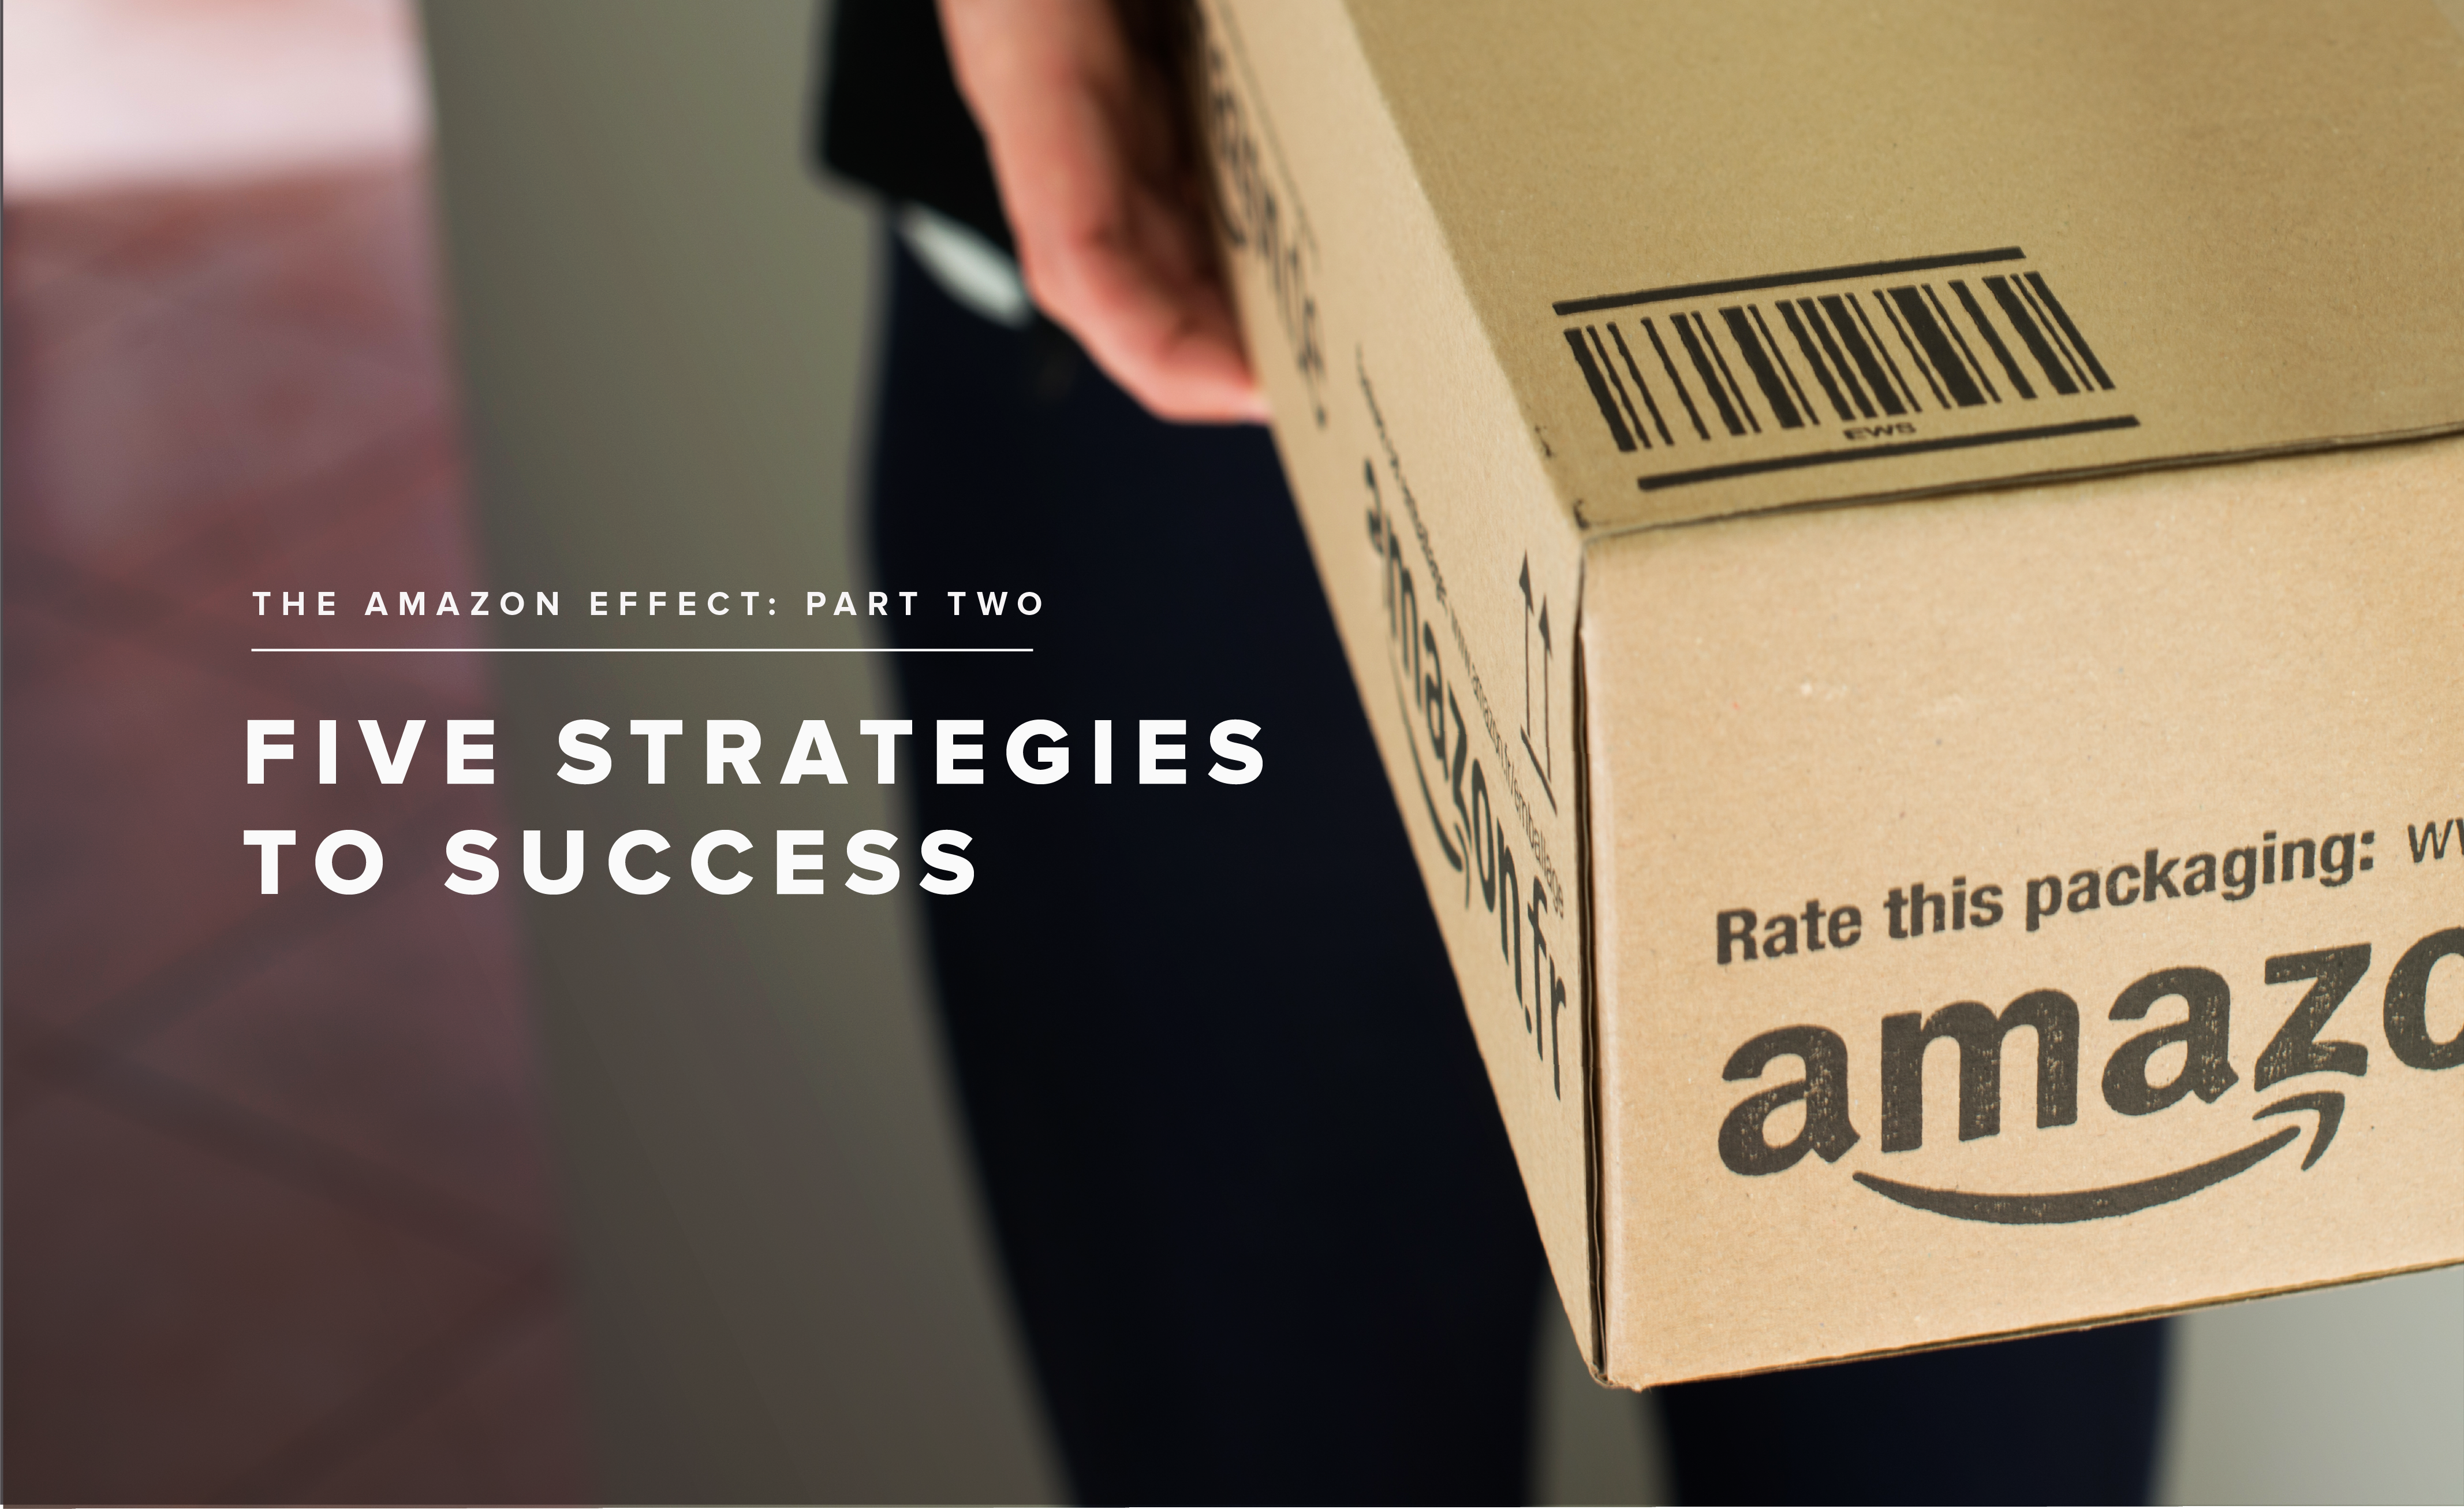 The Amazon Effect Part 2: Five Strategies of Success